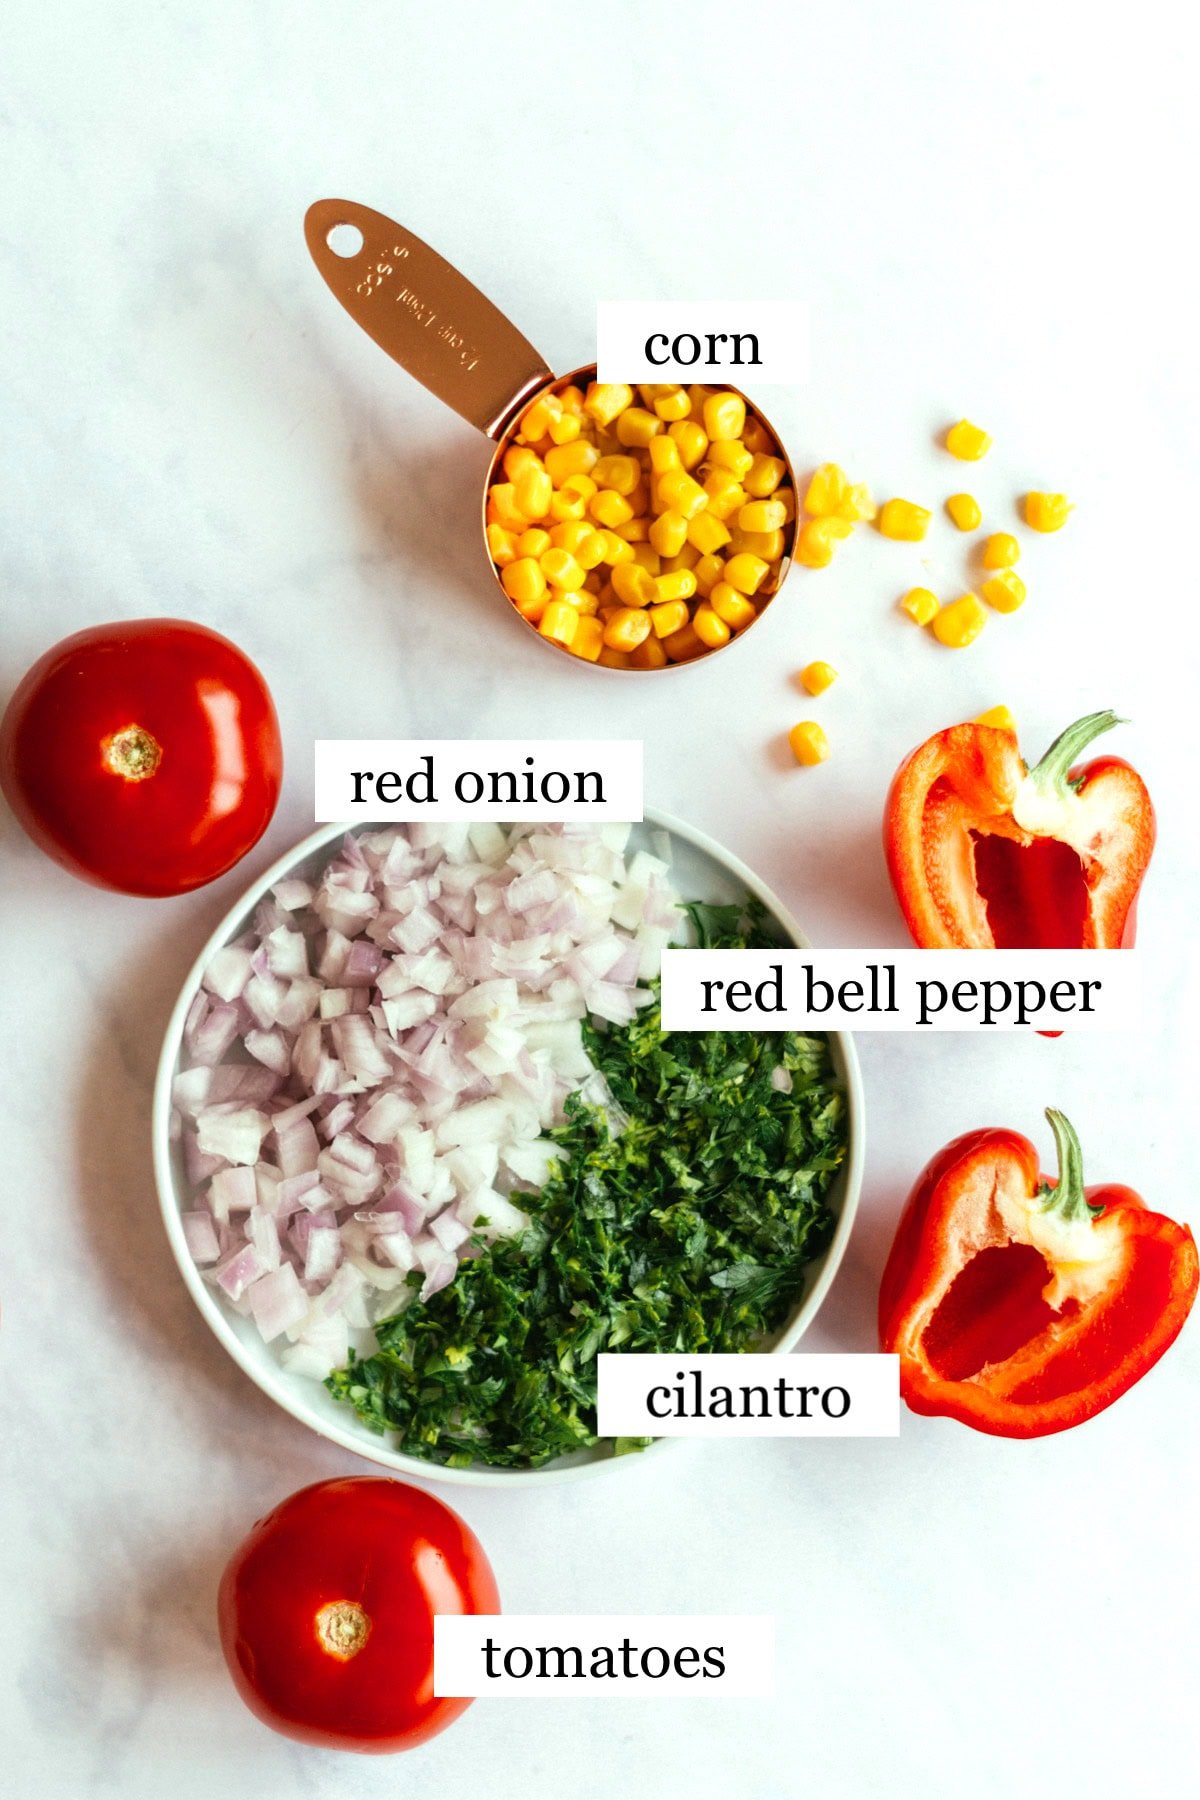 The ingredients in corn pico de gallo, laid out and labeled - corn, red onion, red bell pepper, cilantro, and tomatoes.